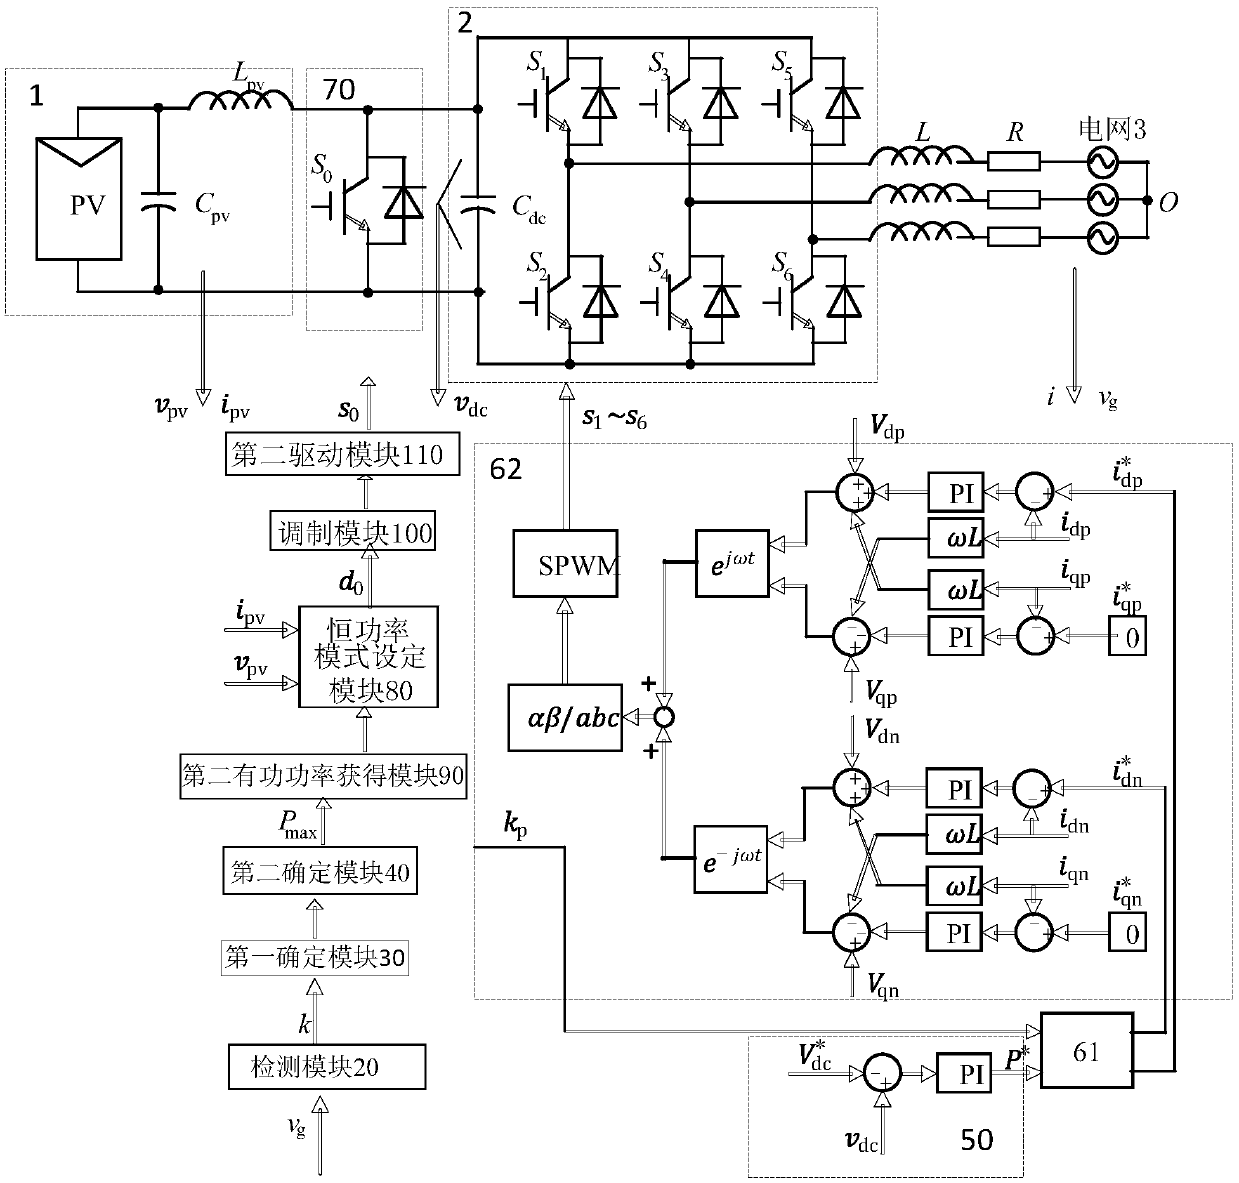 Grid-connected inverter control method and system based on power grid asymmetry fault